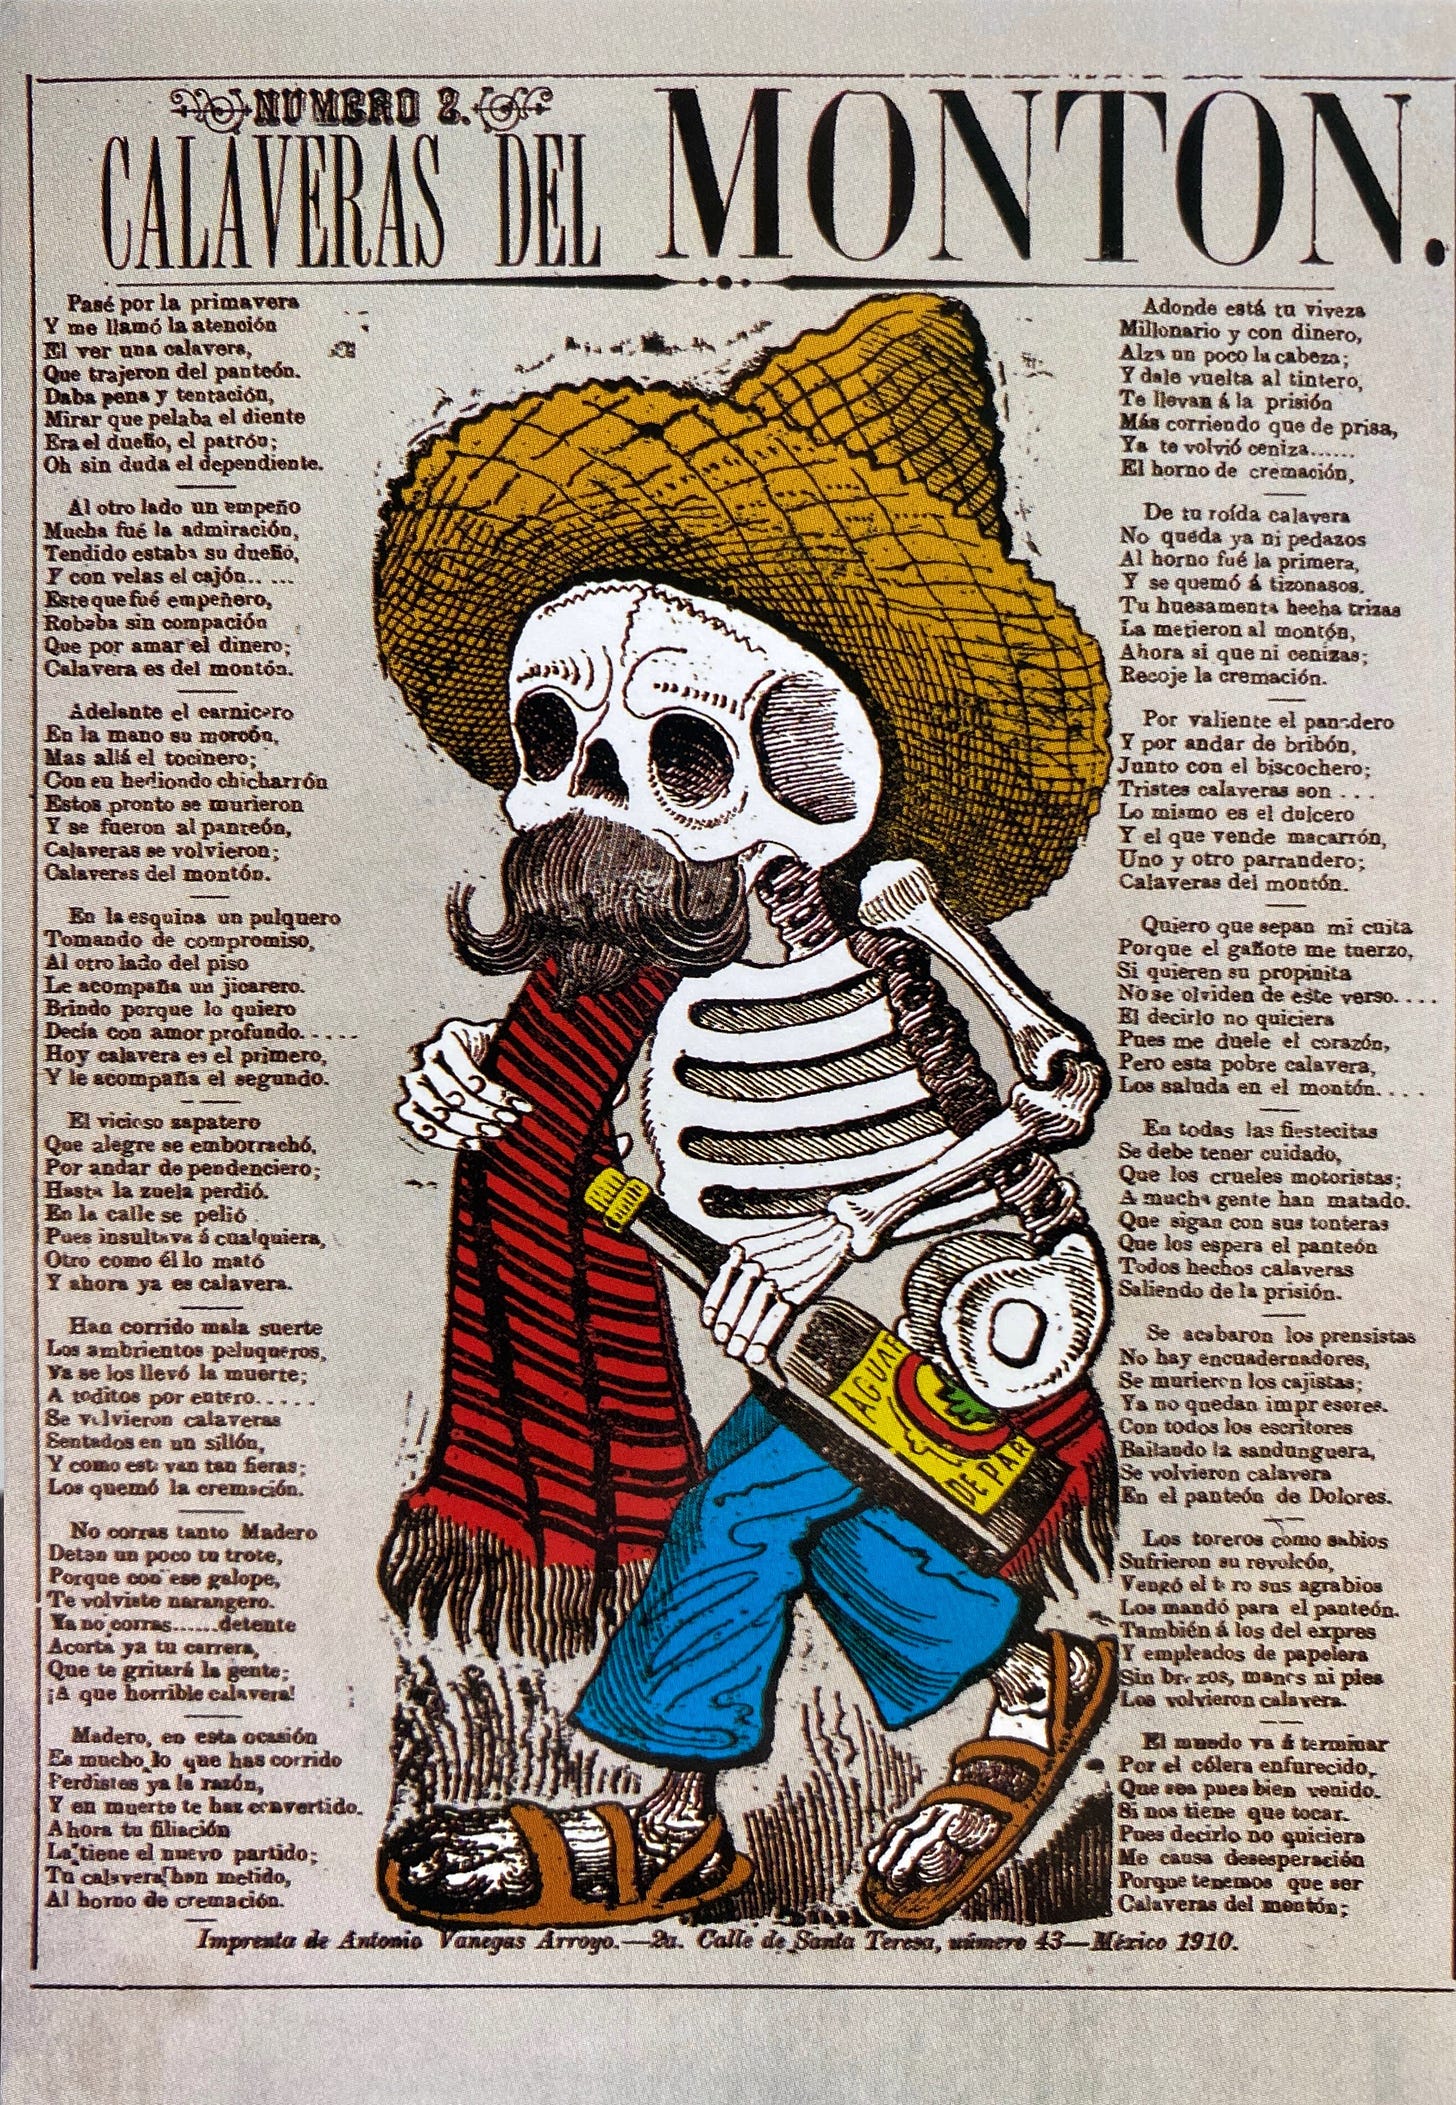 A skeleton wearing a sombrero, a sarape over their right shoulder, pants and open sandals. They have a mustache and carry a bottle of aguardiente in their left hand. It is surrounded by columns of text on both sides, with funny rhymes about death.